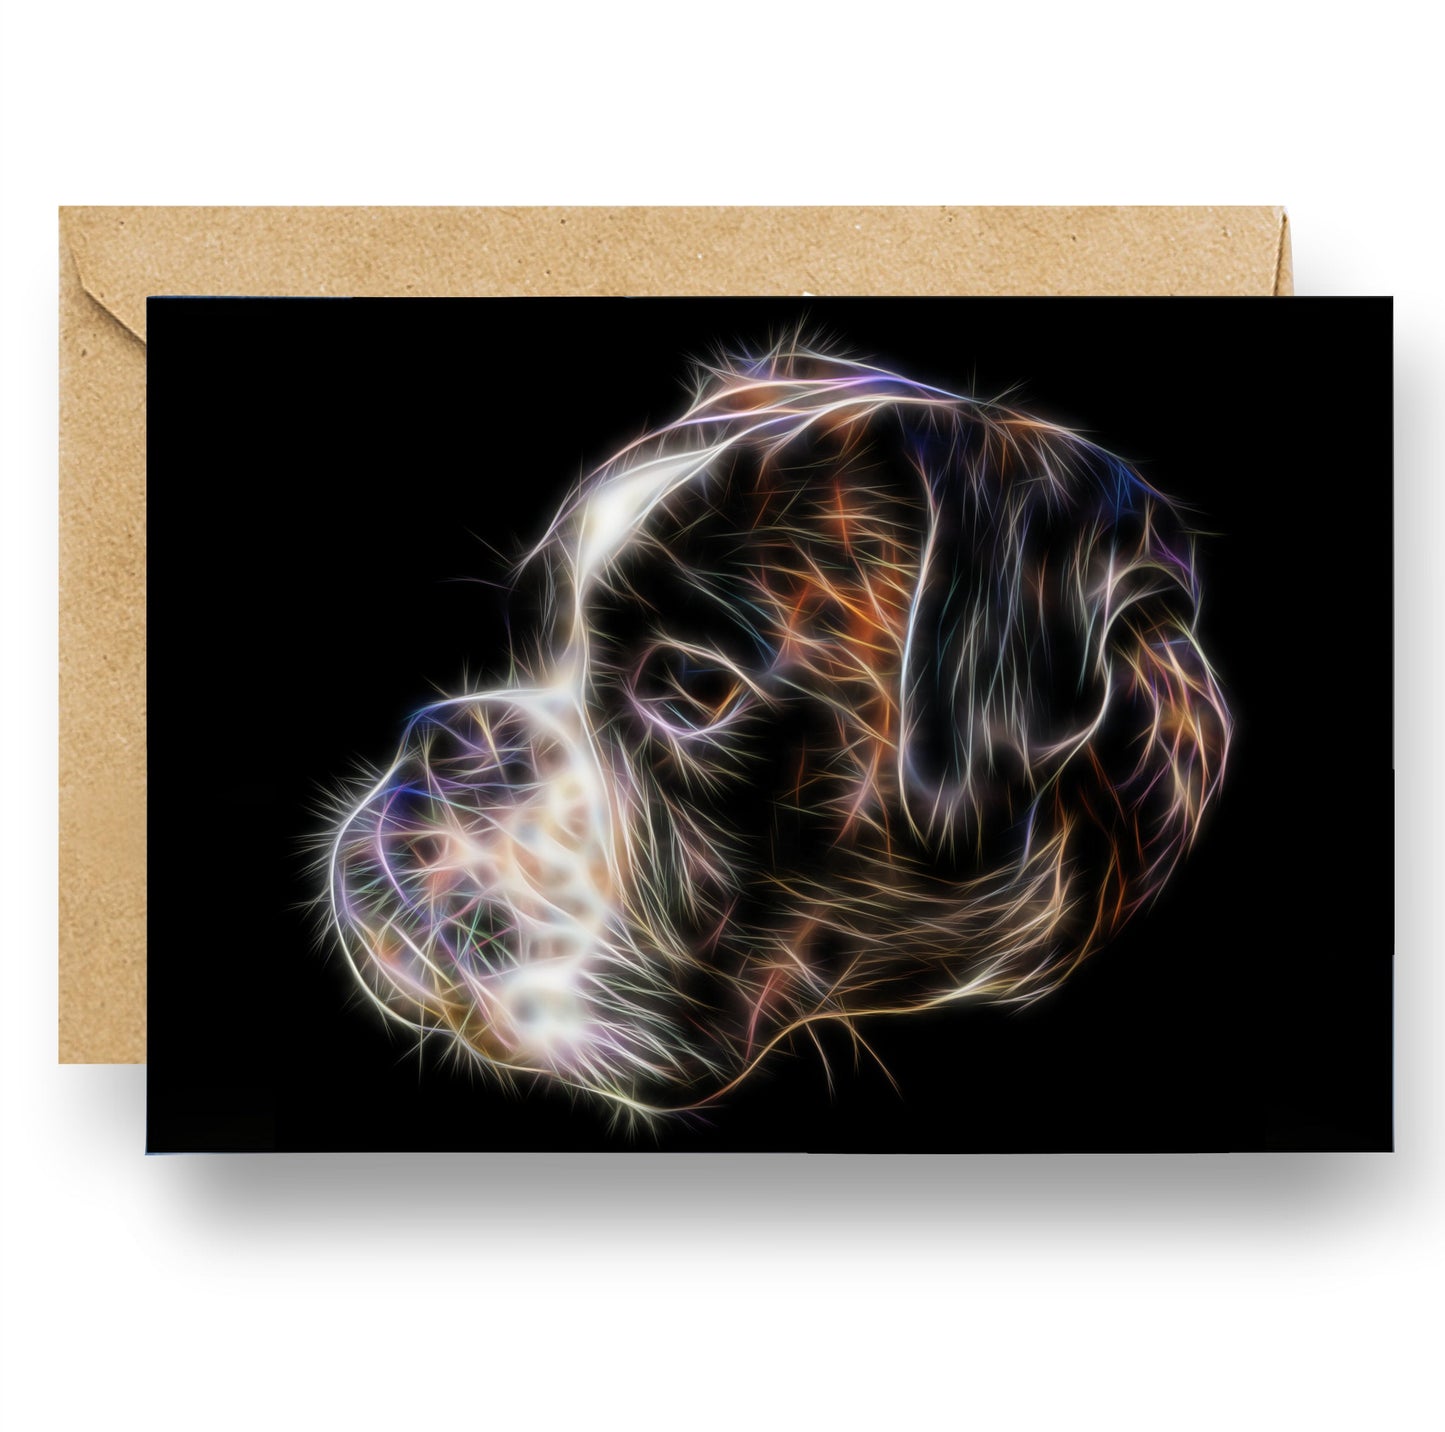 Boxer Dog Greeting Card Blank Inside for Birthdays or any other Occasion